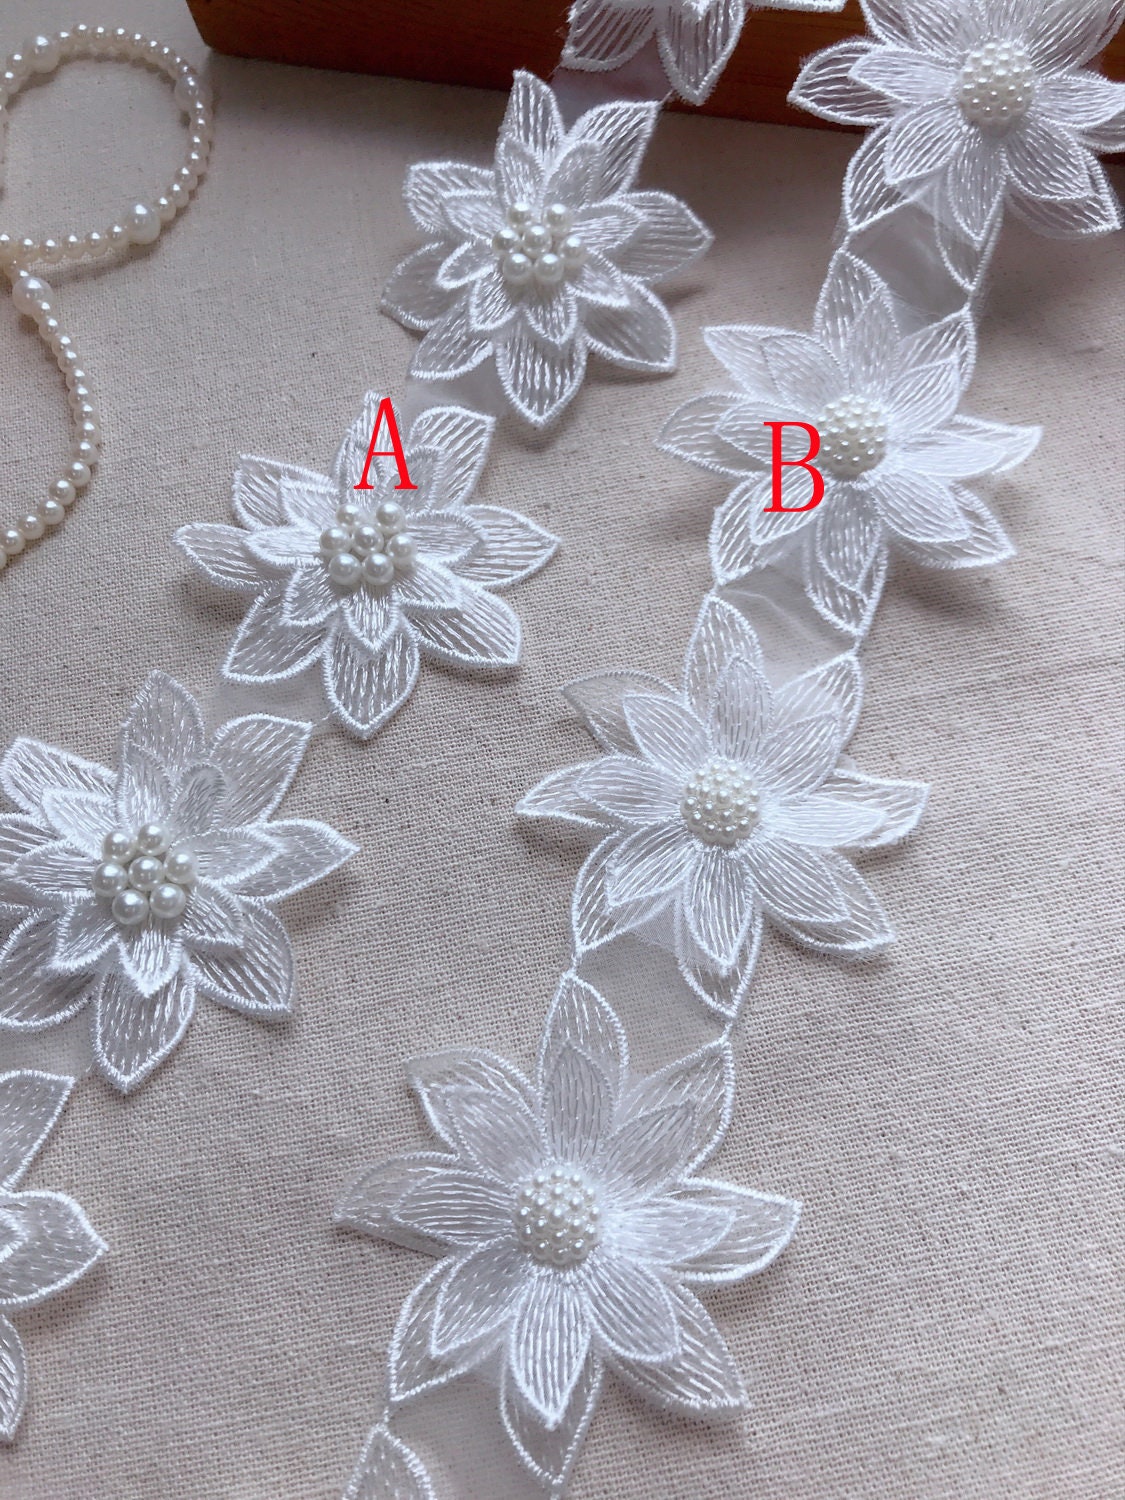 3D Flower Pearls Bead Flower Lace Applique in Ivory for | Etsy